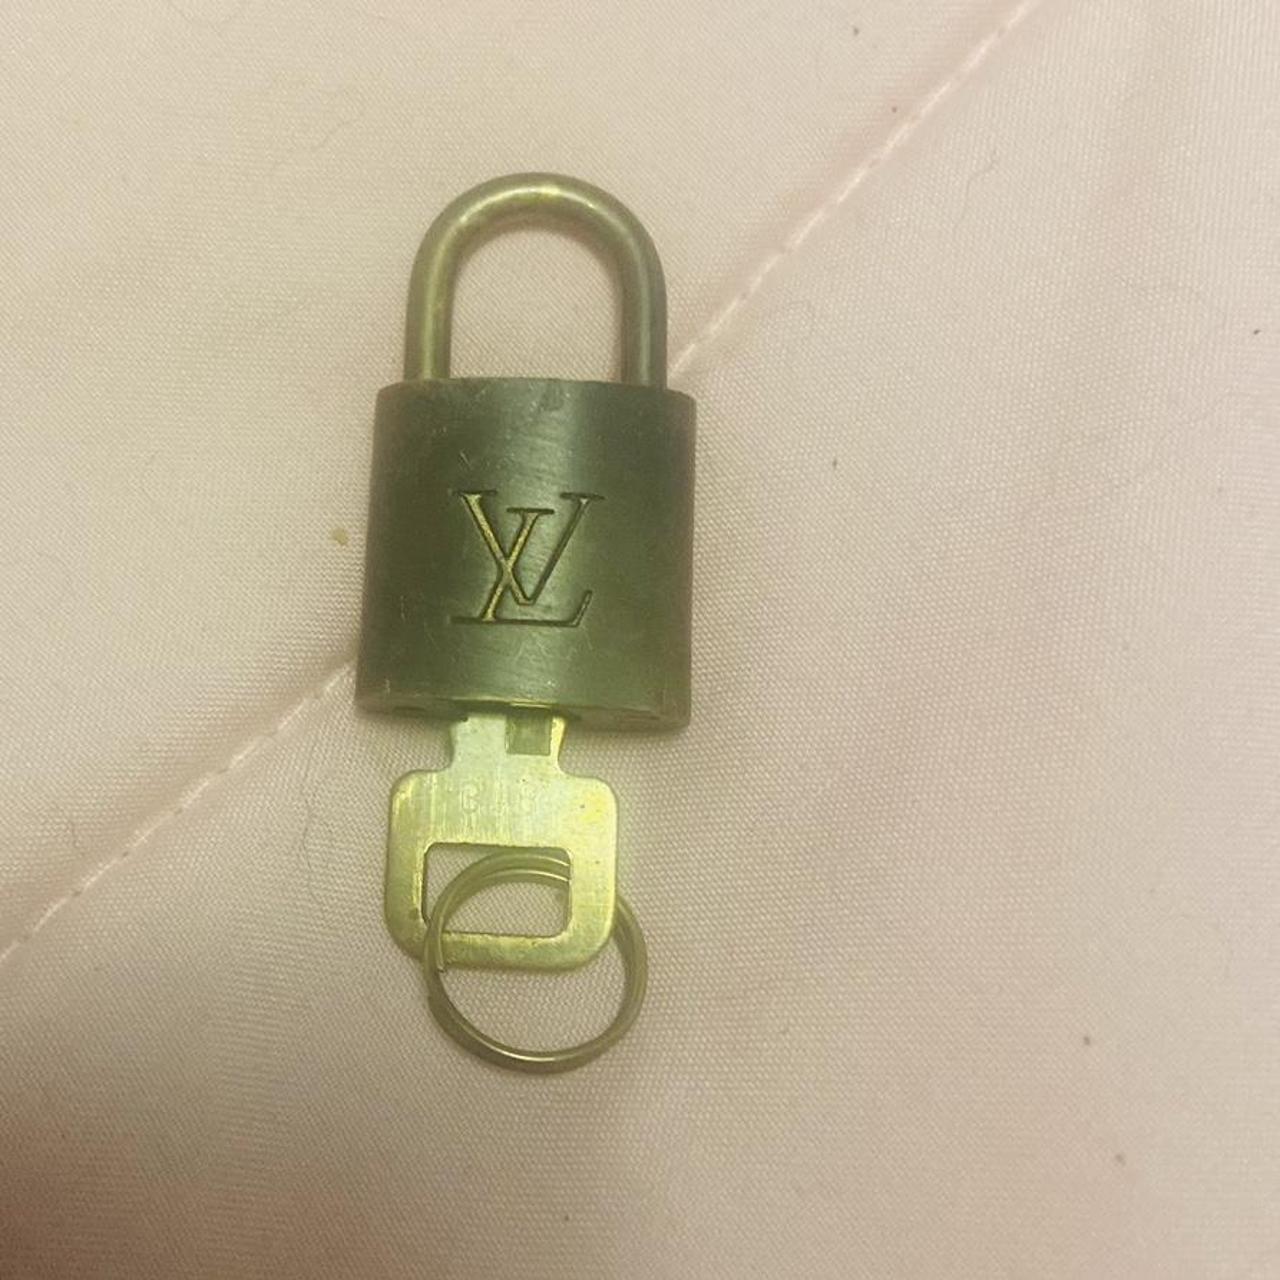 LV locket with key #318 Can be used on bags or - Depop